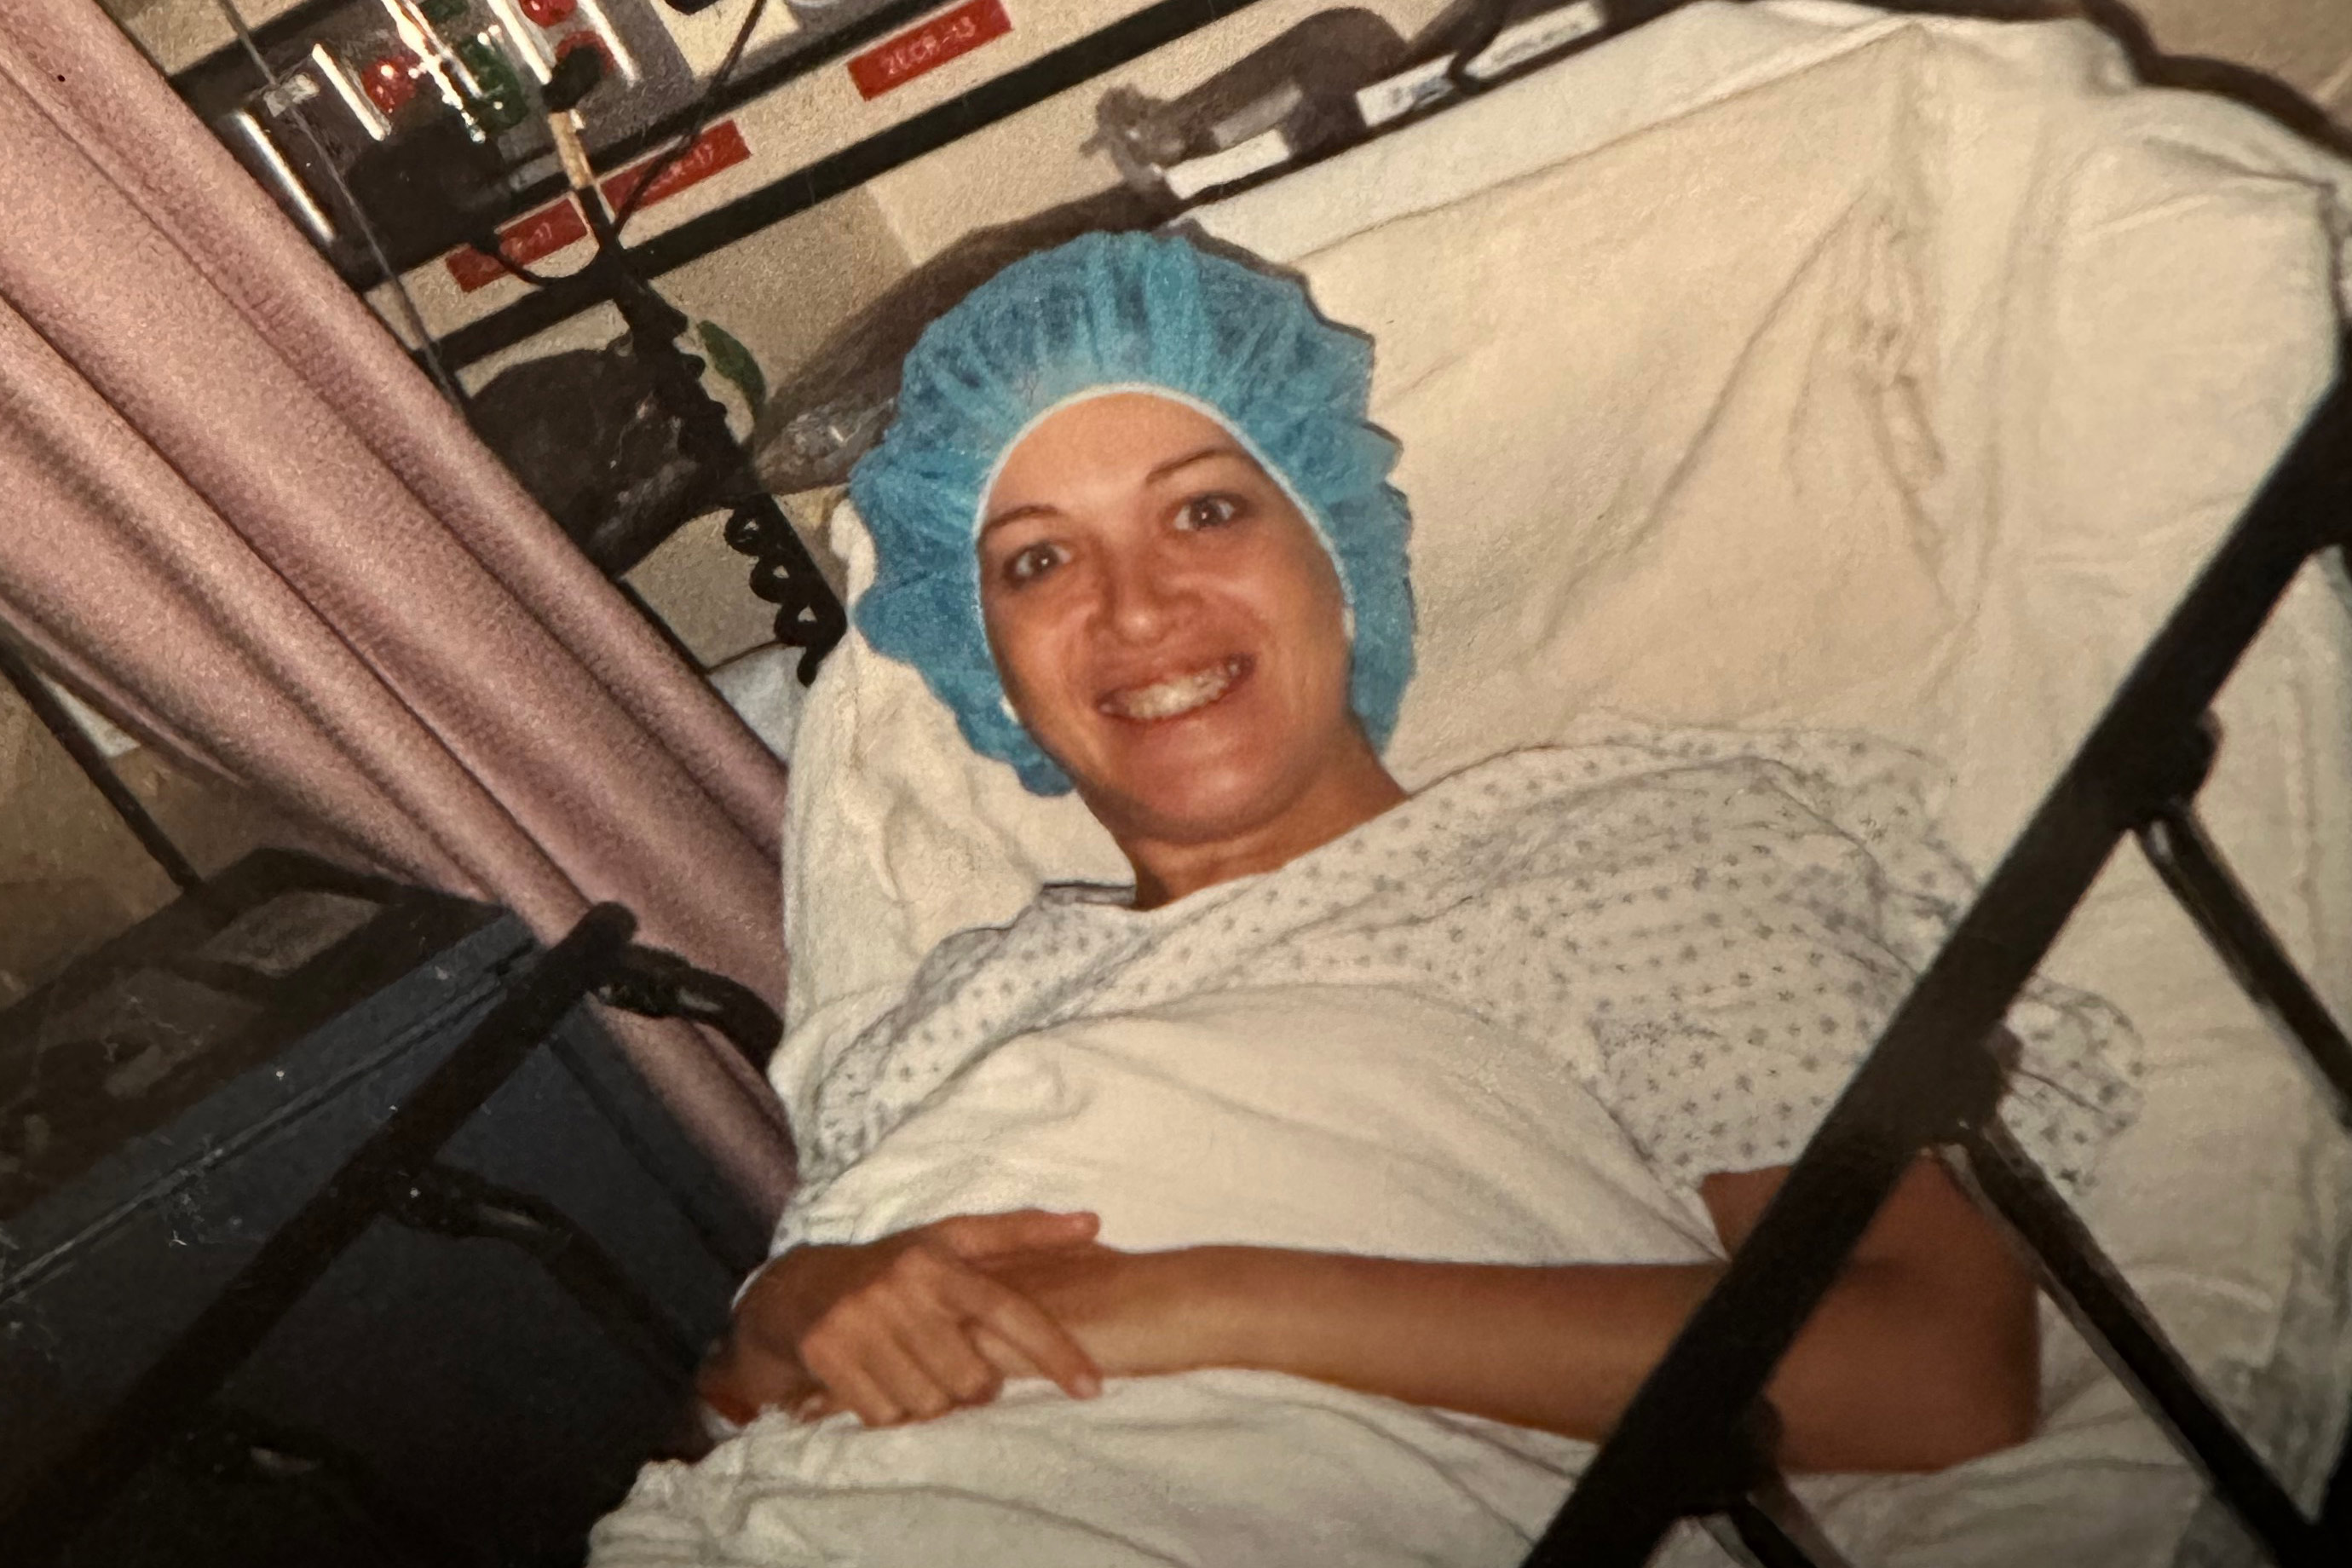 A photo of a woman smiling in a hospital bed with a gauze cap on her head.